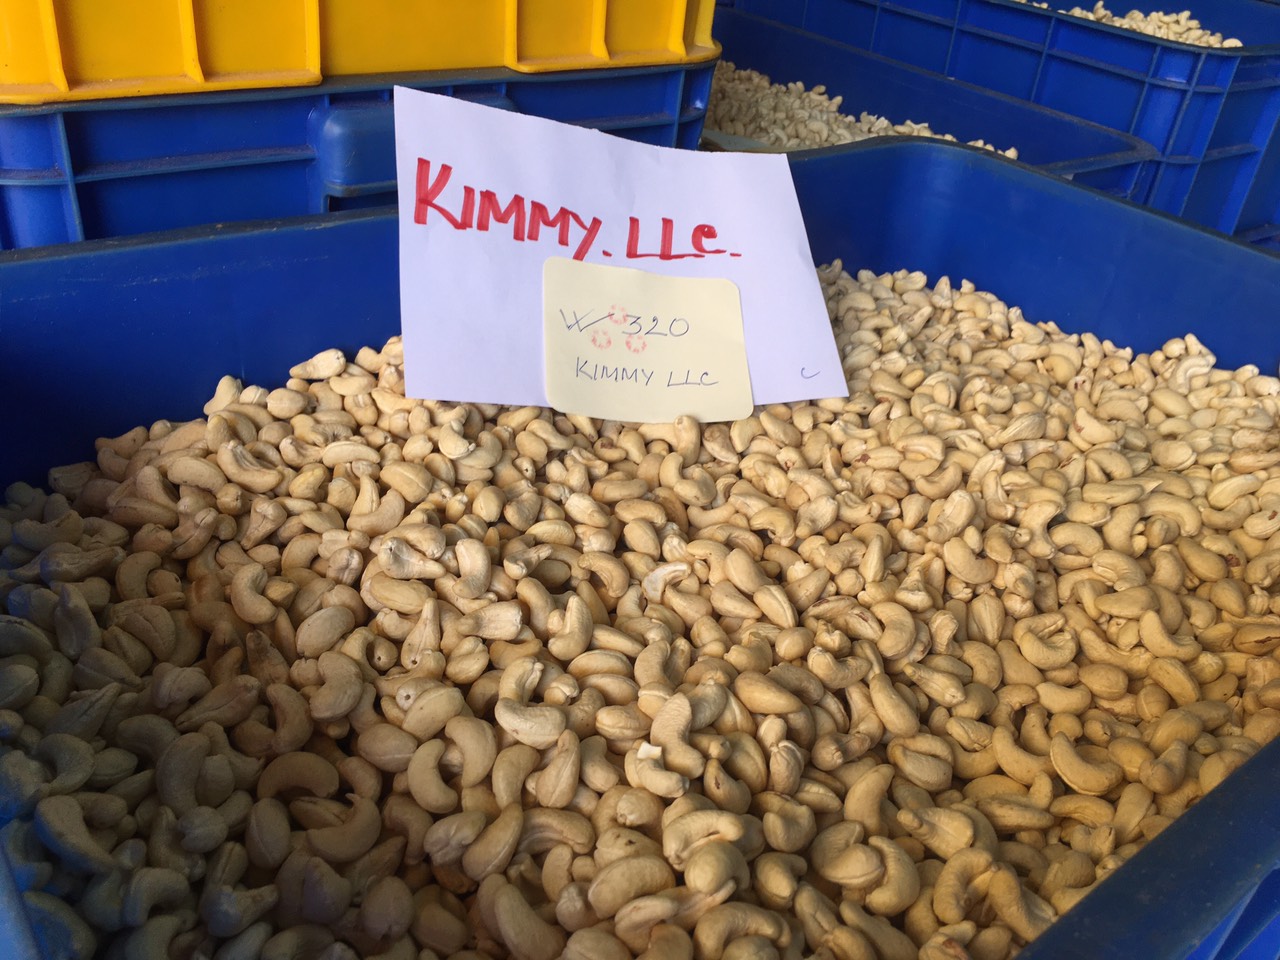 Vietnam W320 Cashew Nut White Whole Cashews High Quality Ready For Export Raw Image Of W320 From Our Cashew Factory! 14